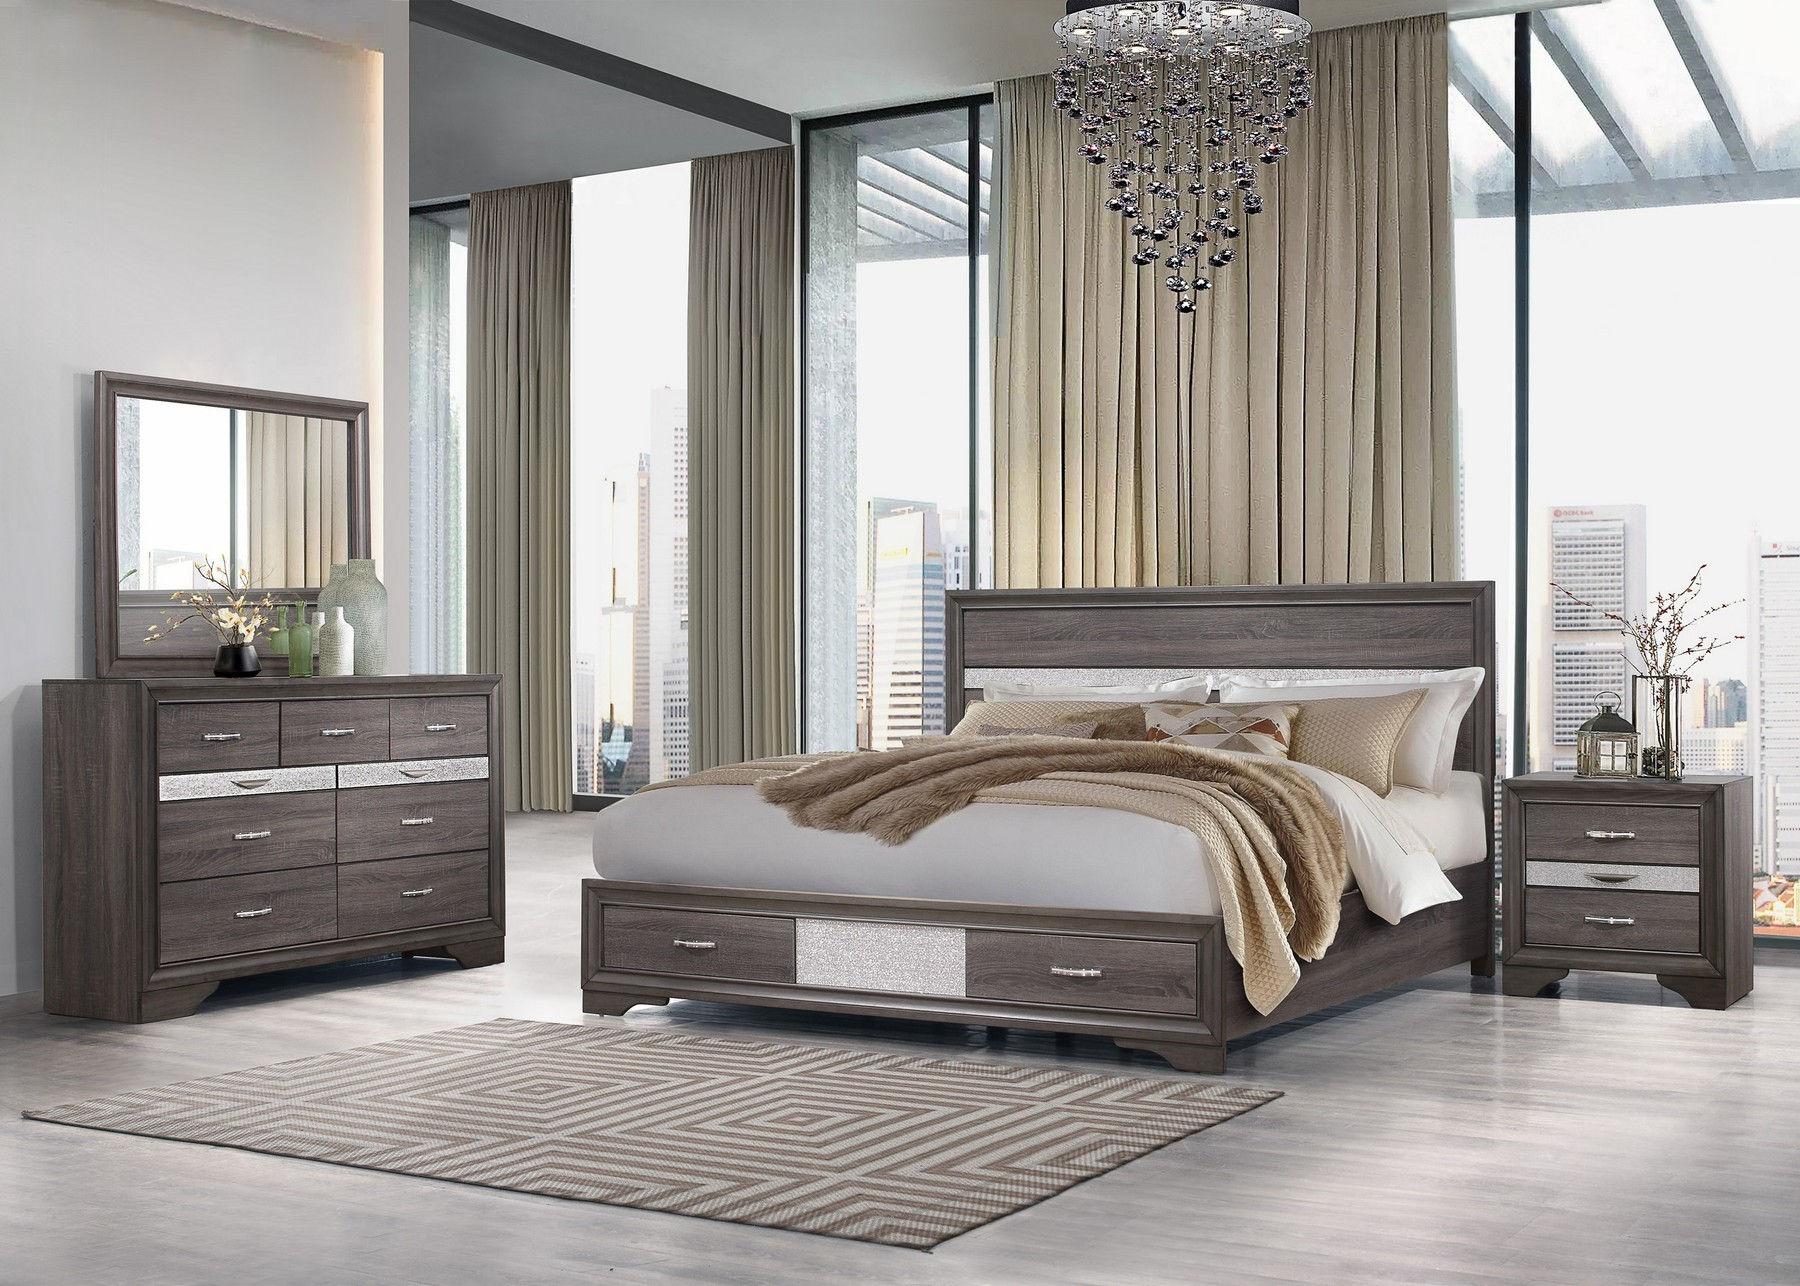 

    
SEVILLE Contemporary Storage Queen Bed Set 4Pcs in Weathered Grey Global US
